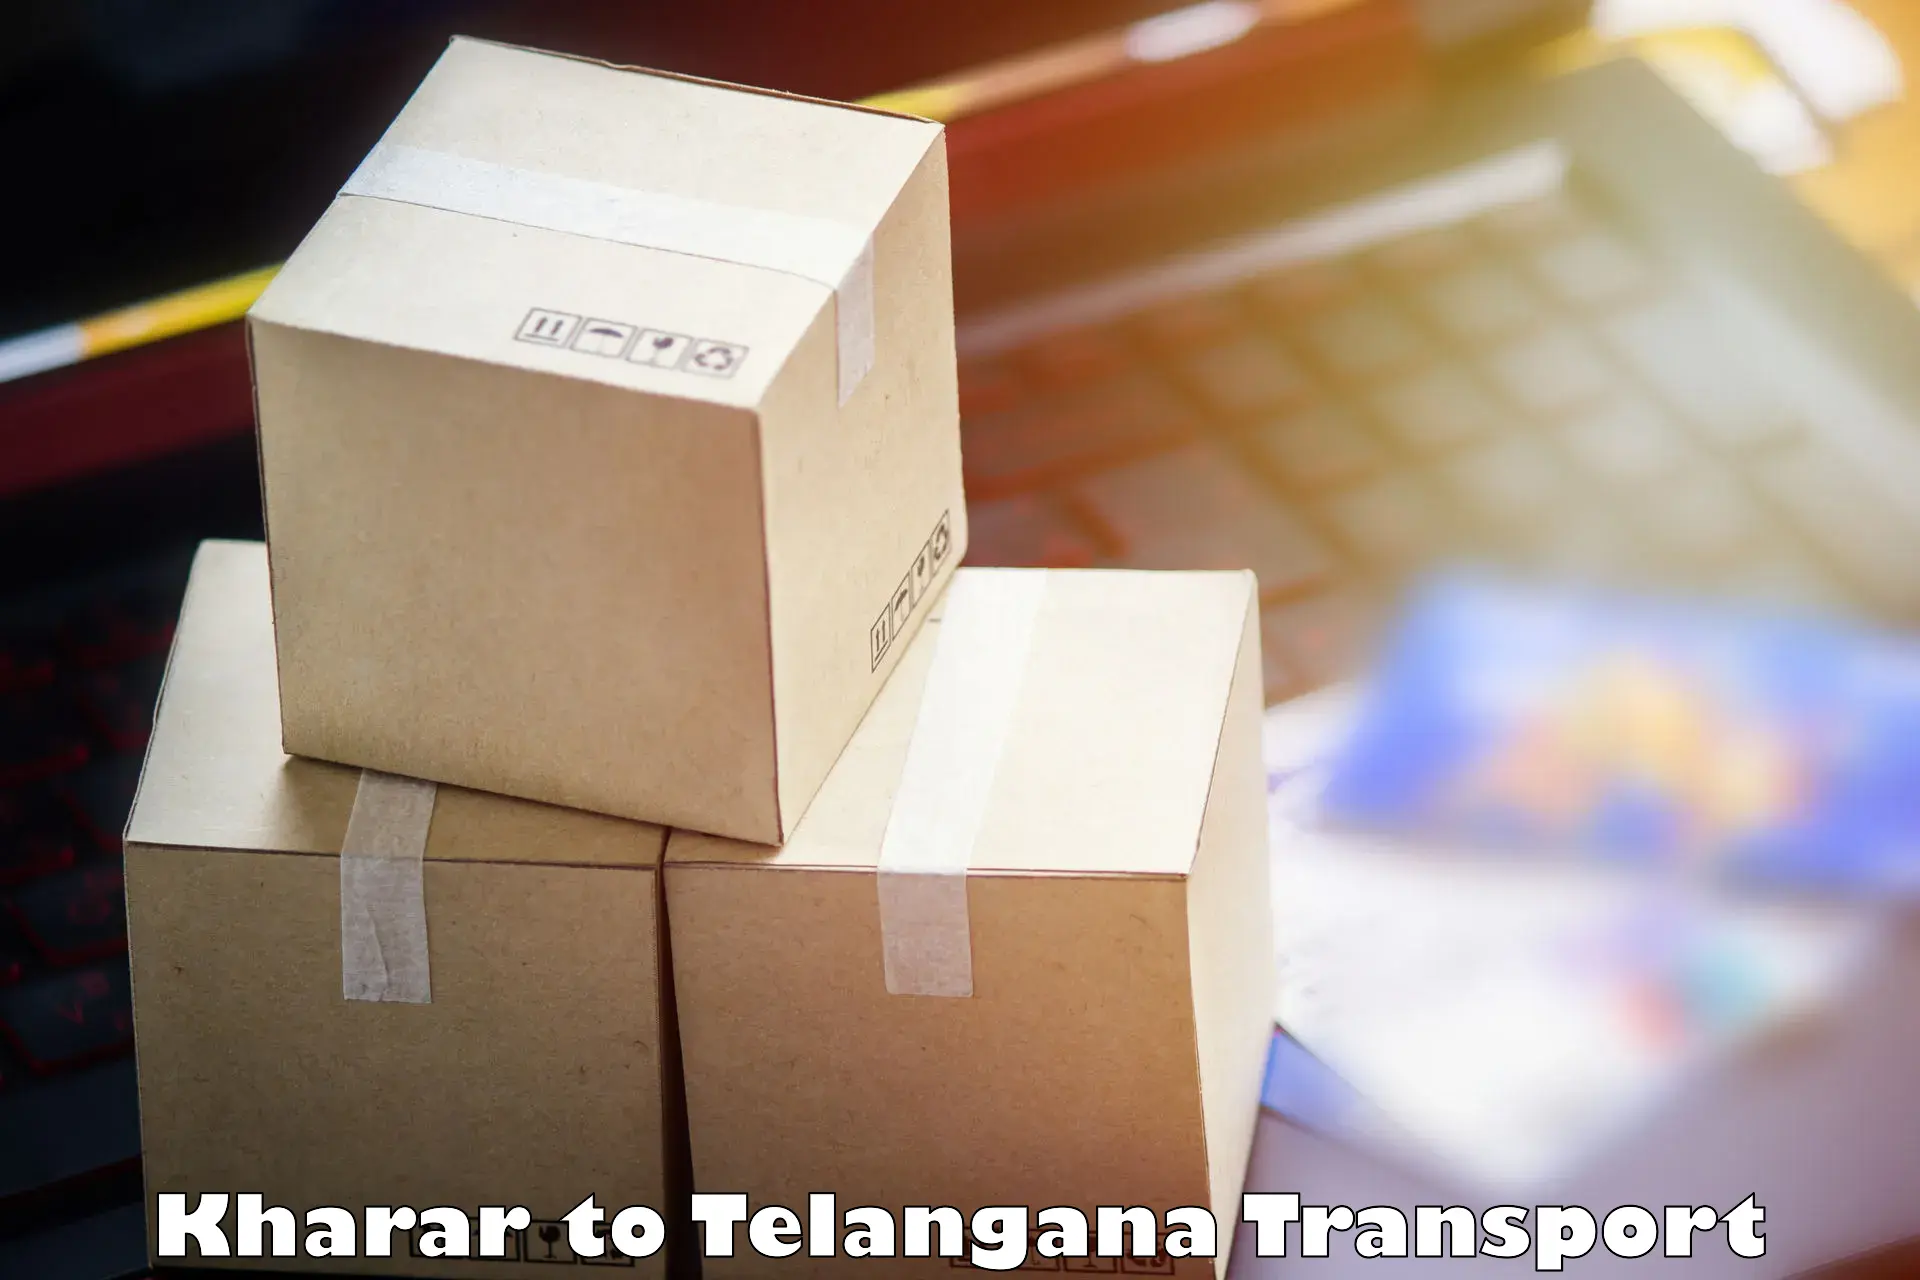 Container transport service Kharar to Secunderabad